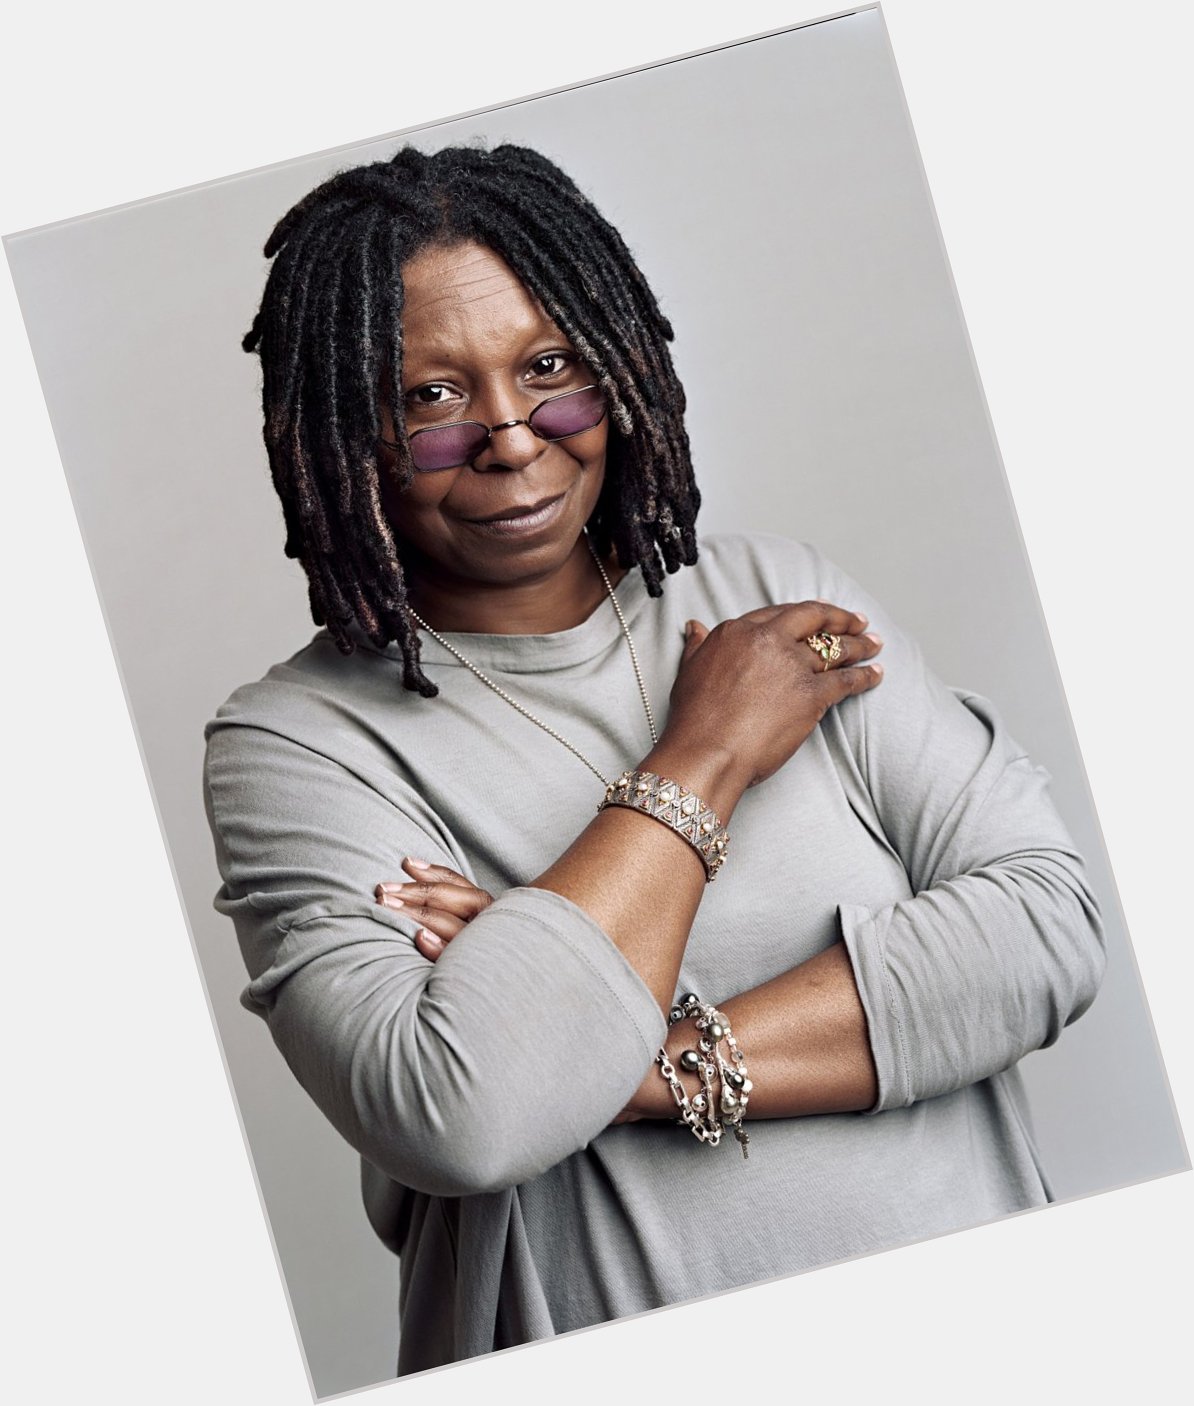 Happy birthday to actress Whoopi Goldberg who turns 60 years old today 